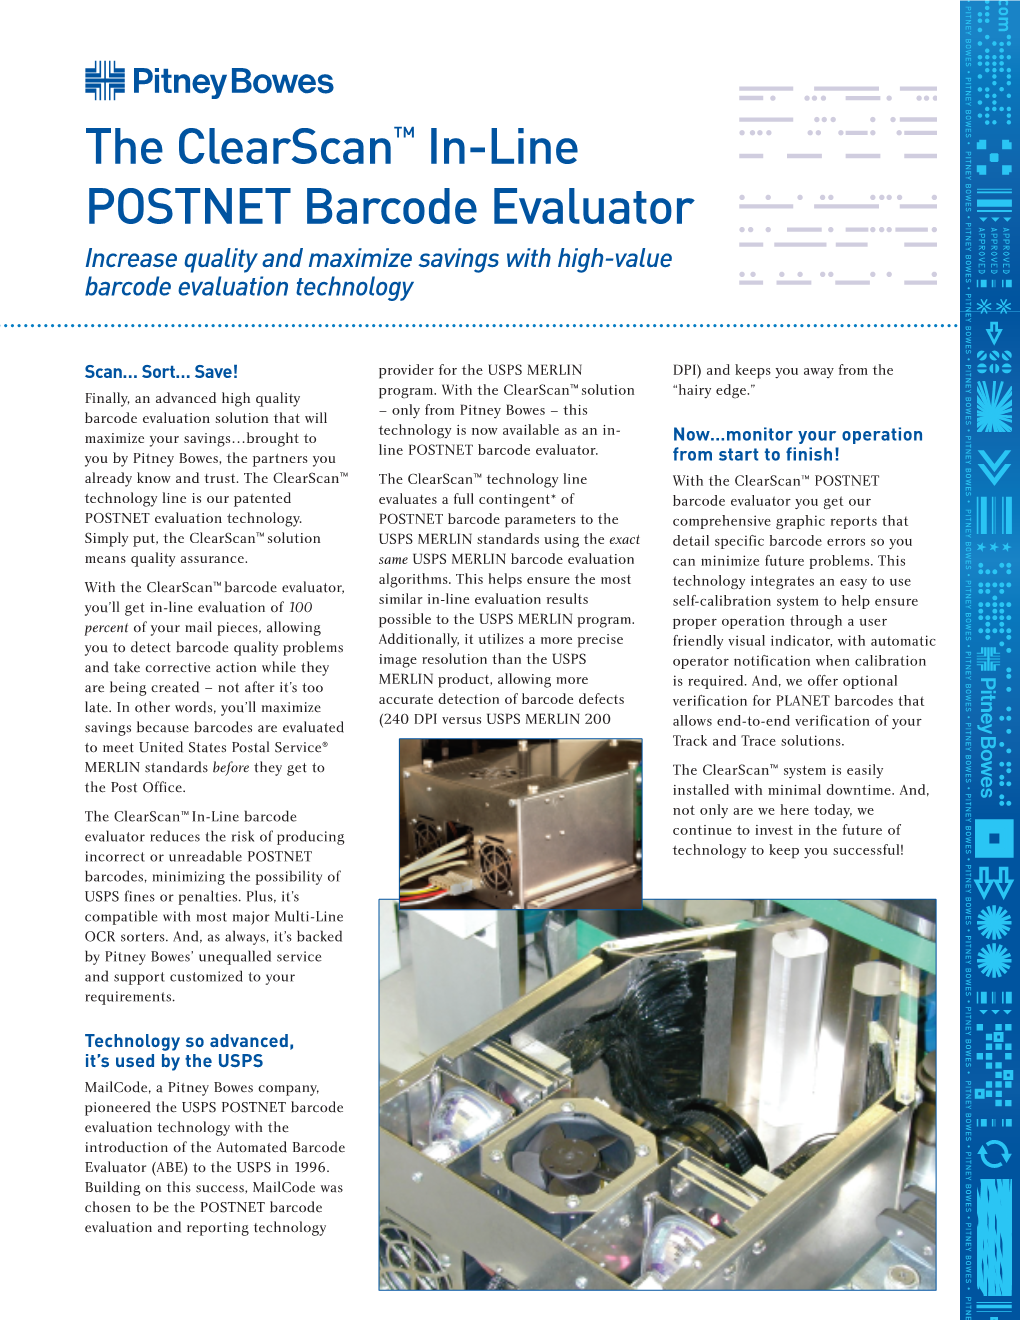 The Clearscan™ In-Line POSTNET Barcode Evaluator Increase Quality and Maximize Savings with High-Value Barcode Evaluation Technology